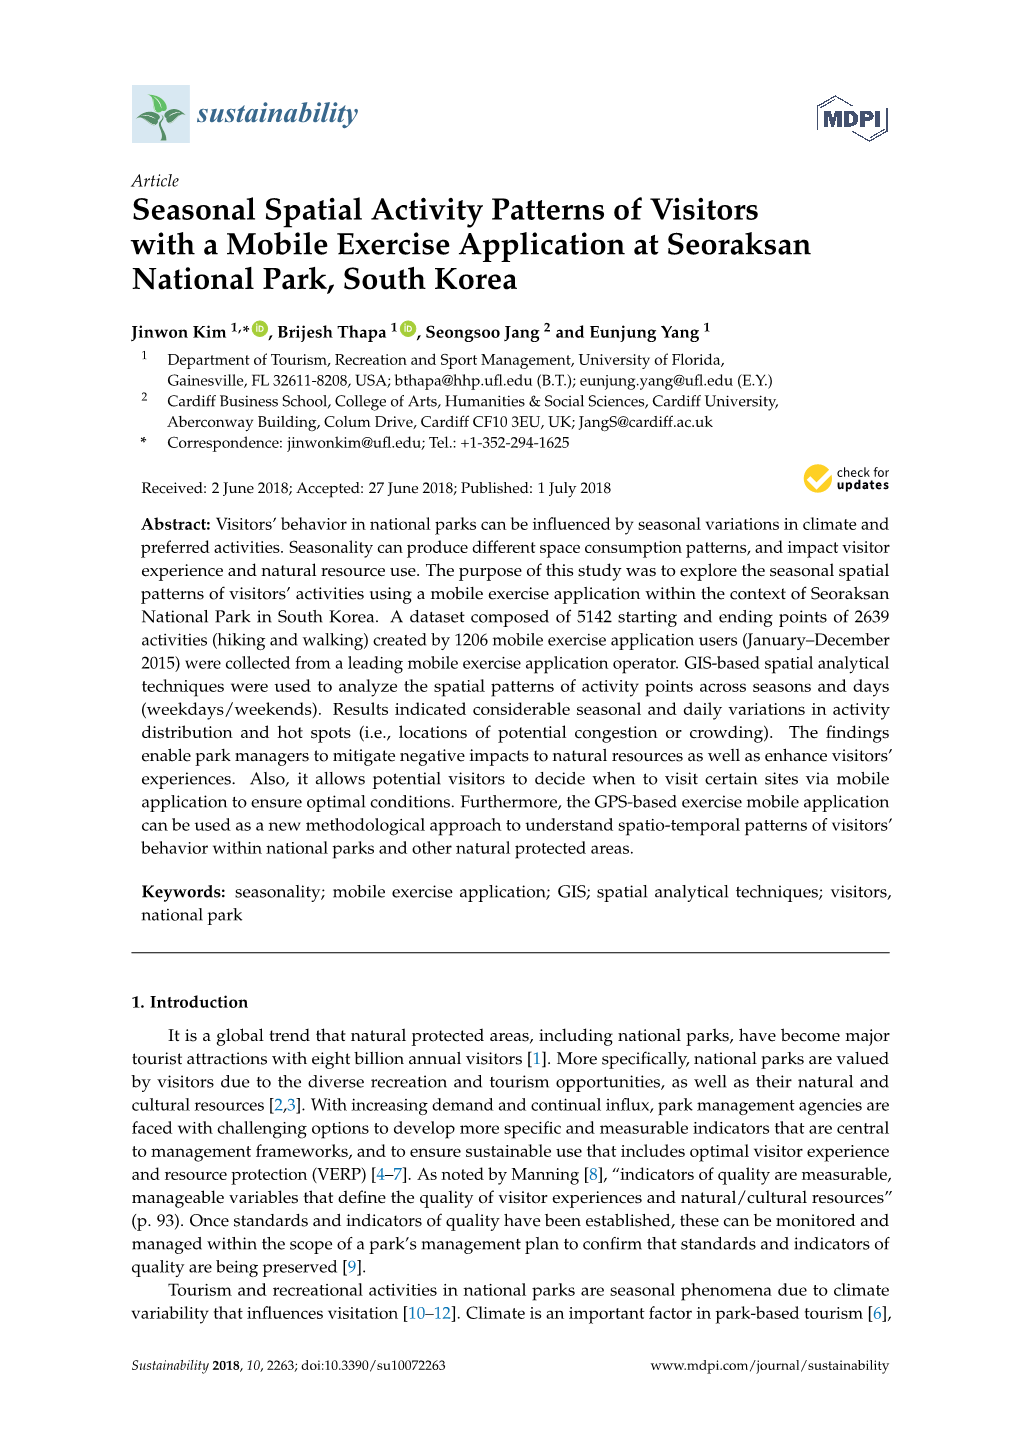 Seasonal Spatial Activity Patterns of Visitors with a Mobile Exercise Application at Seoraksan National Park, South Korea